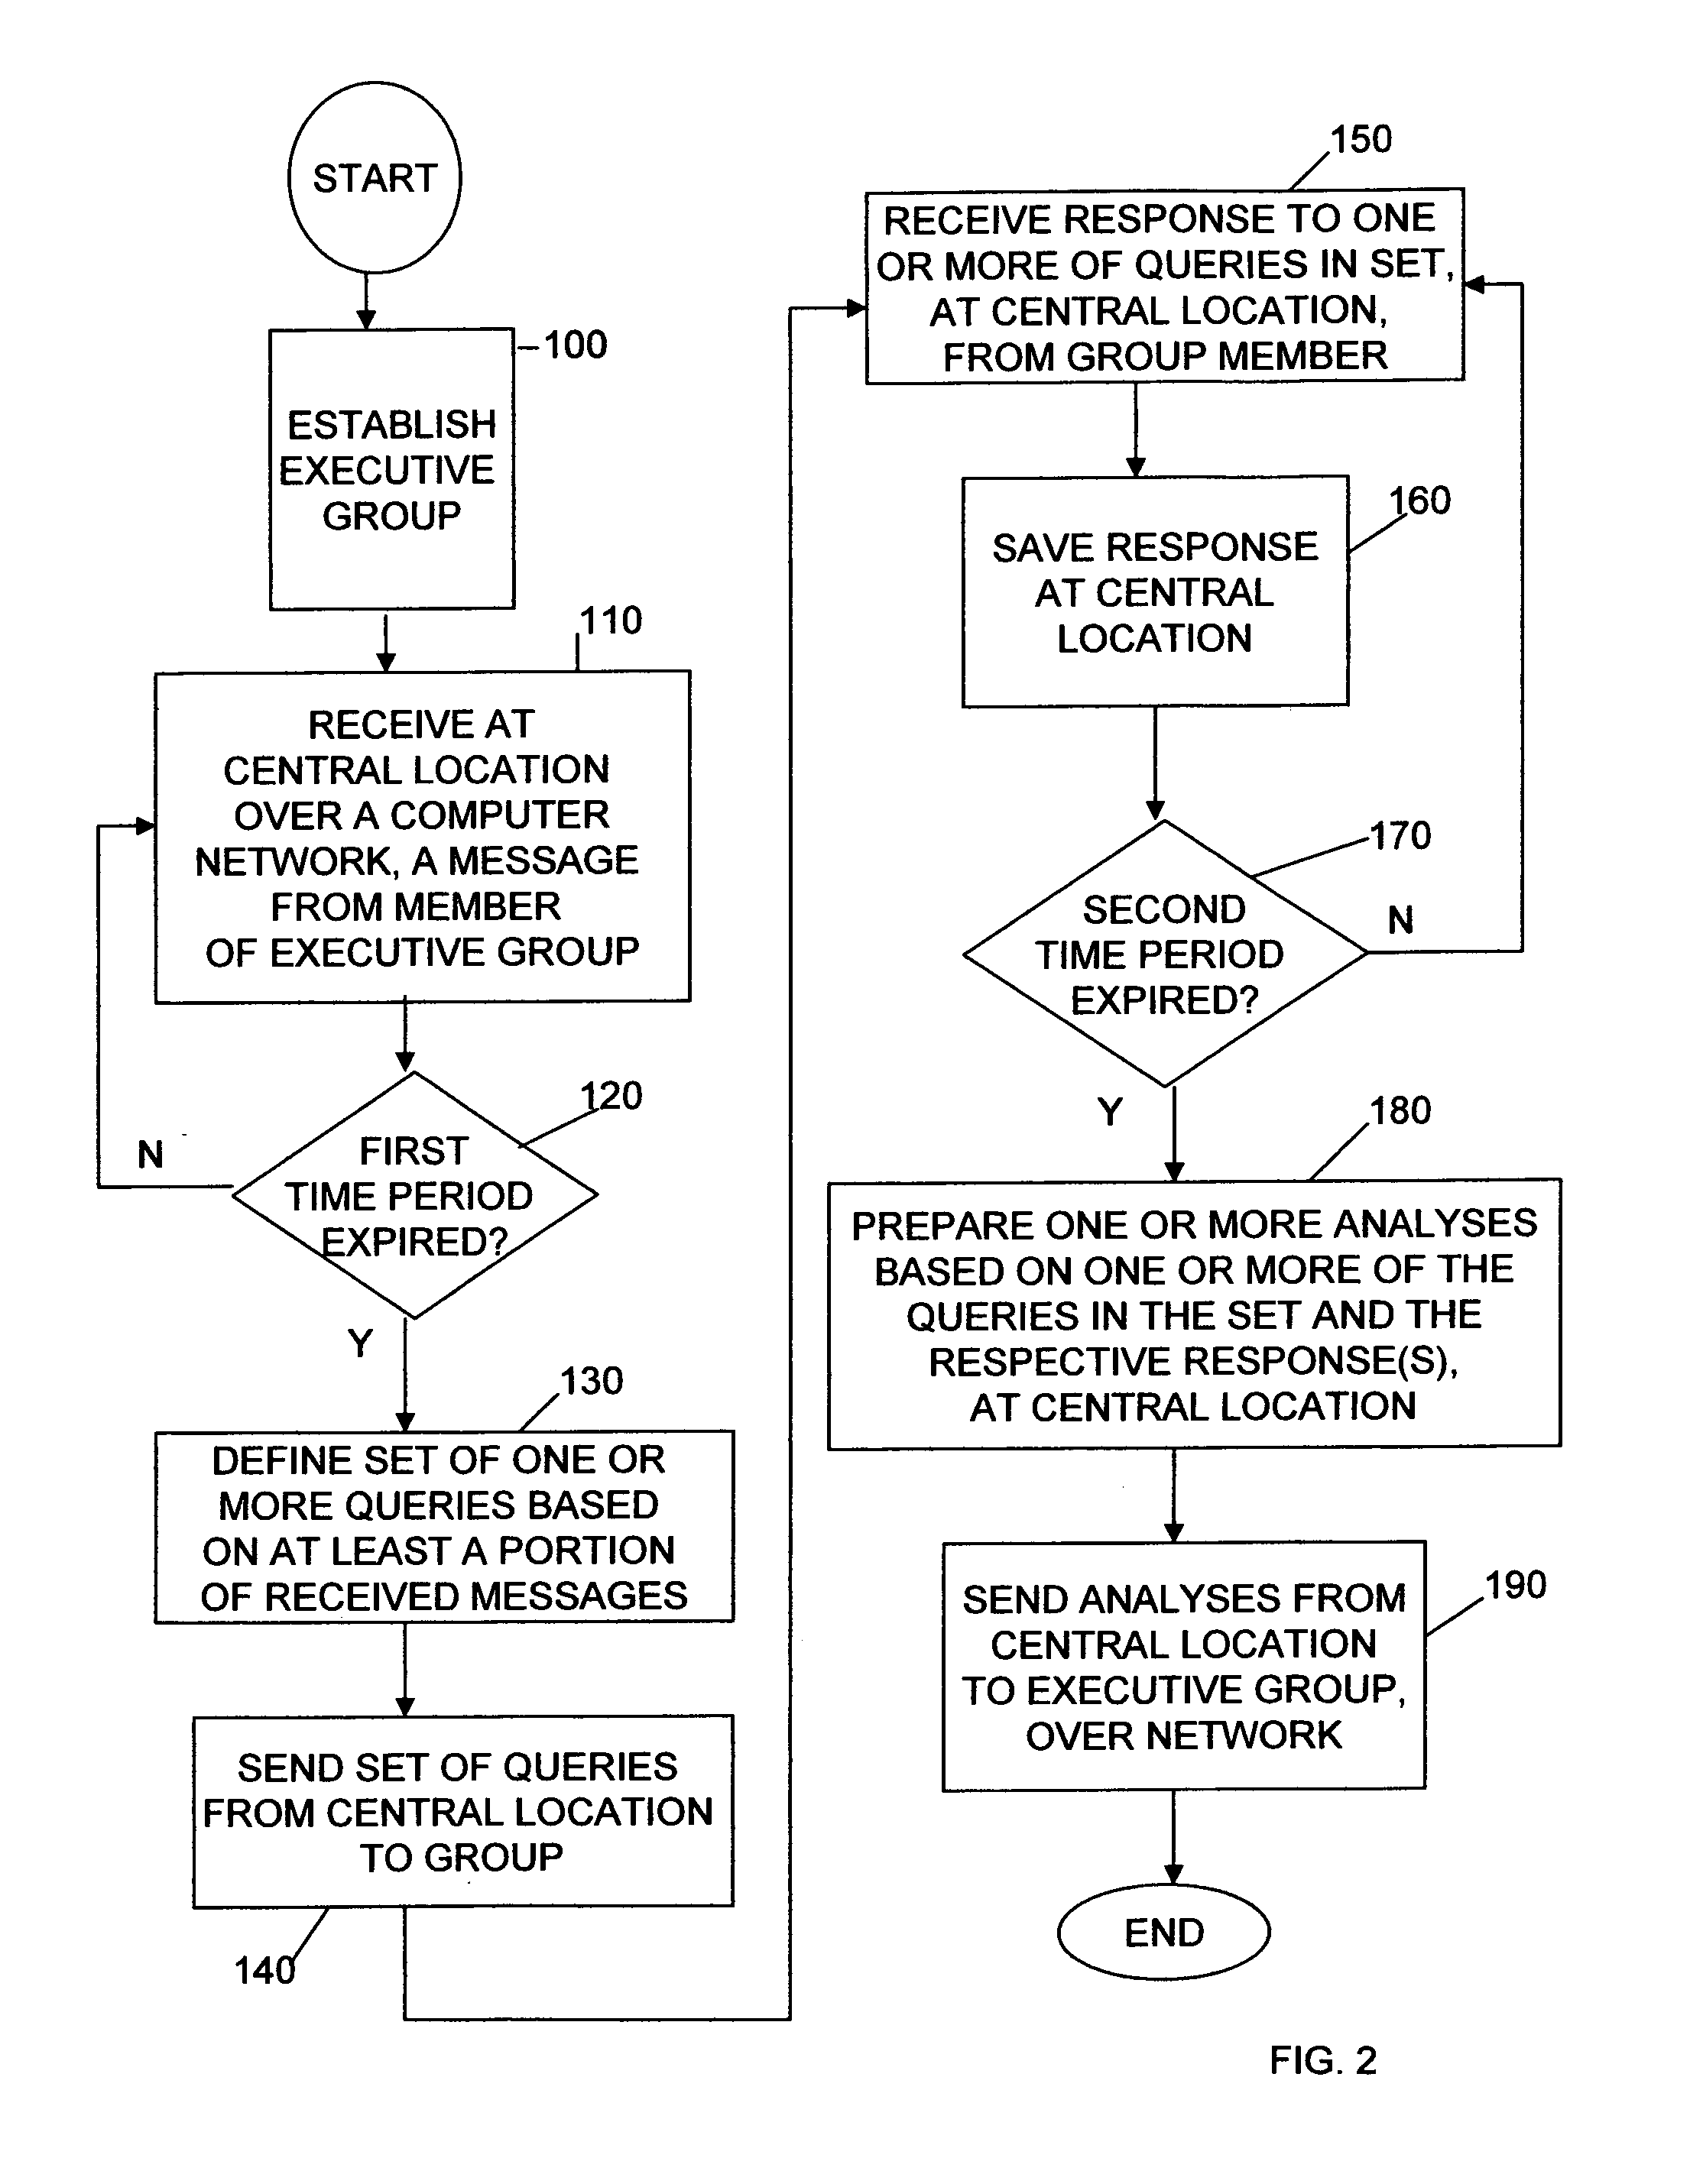 Computerized knowledge brokerage system